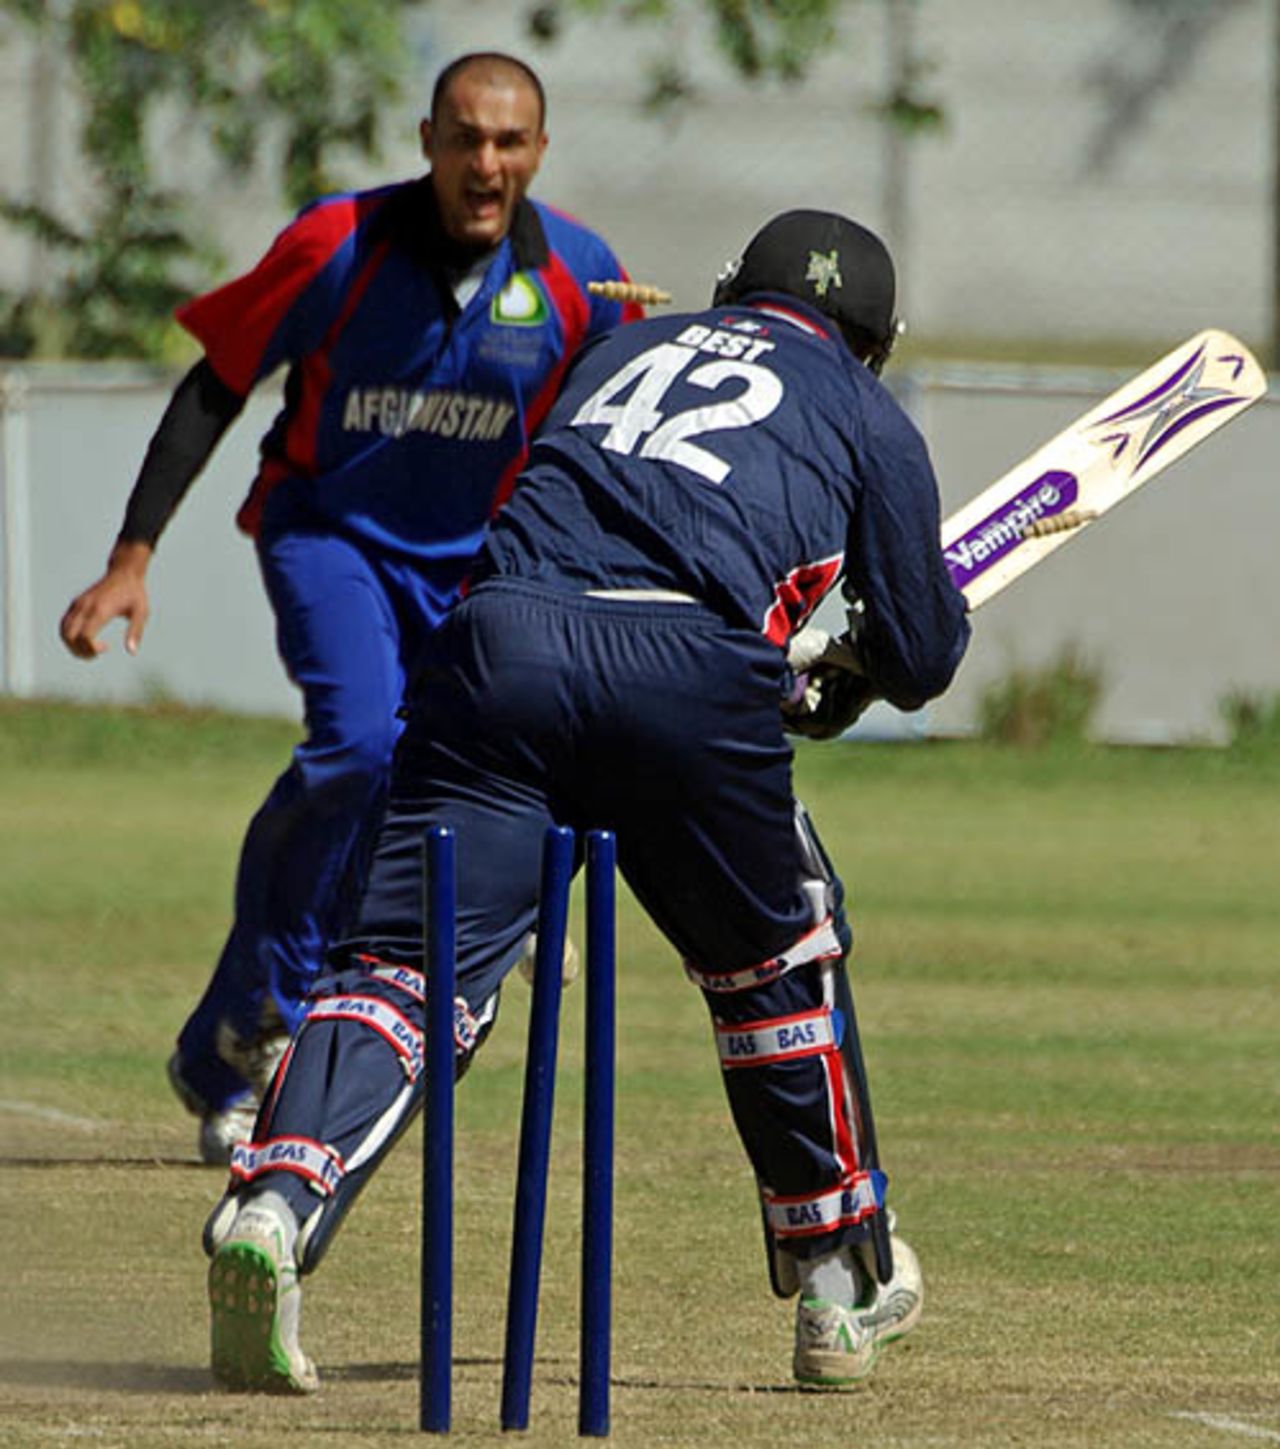 Pearson Best is castled by Hamid Hassan, Afghanistan v Cayman Islands, World Cricket League Division 3, Buenos Aires, January 31, 2009